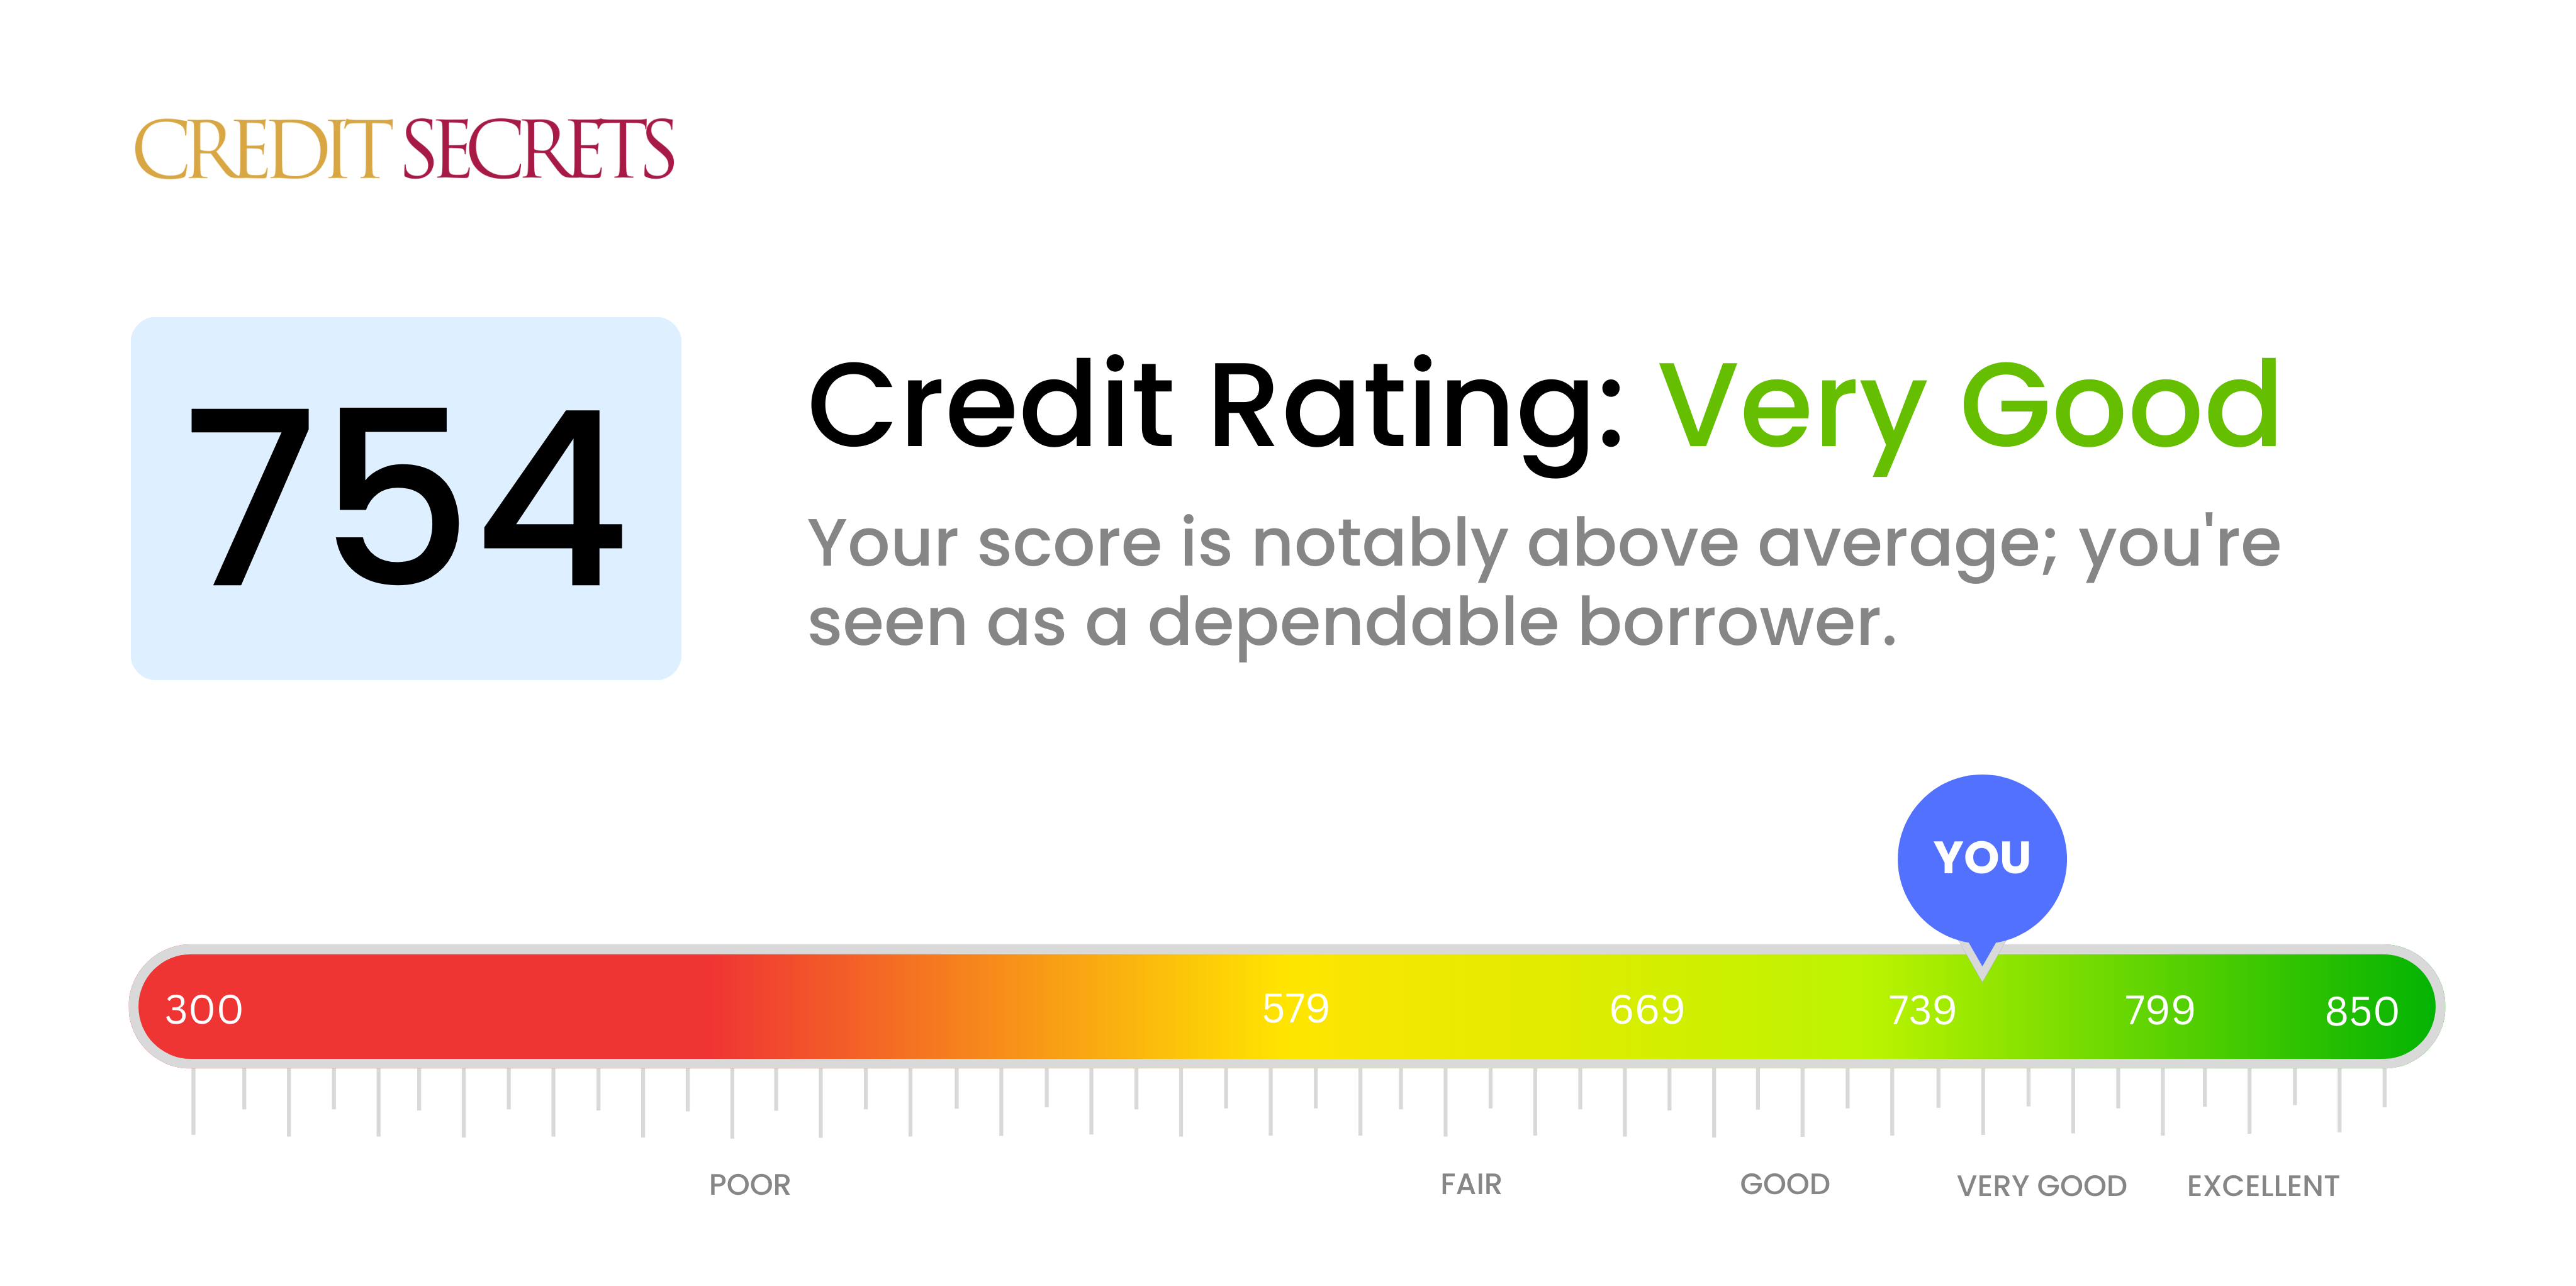 Is 754 a good credit score?